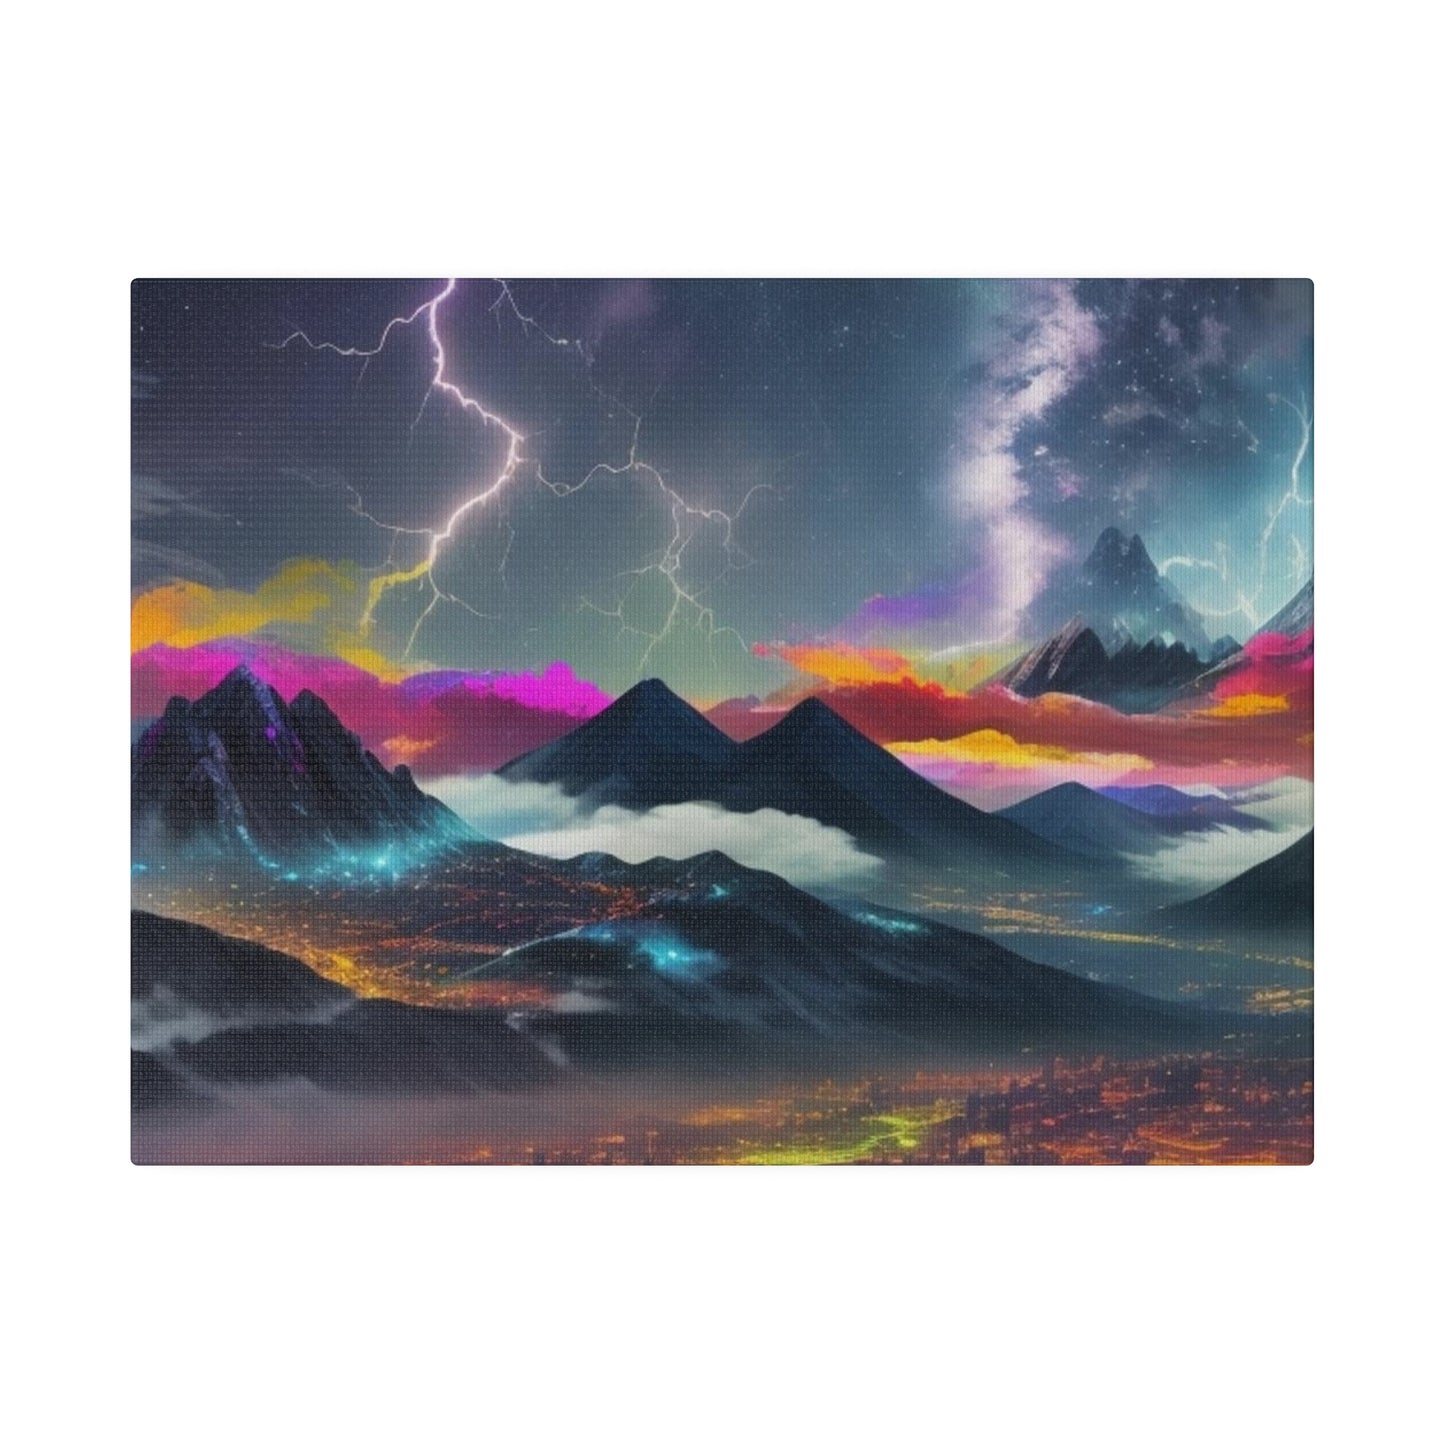 Messy Colourful Lightning Above Mountains - Matte Canvas, Stretched, 0.75"